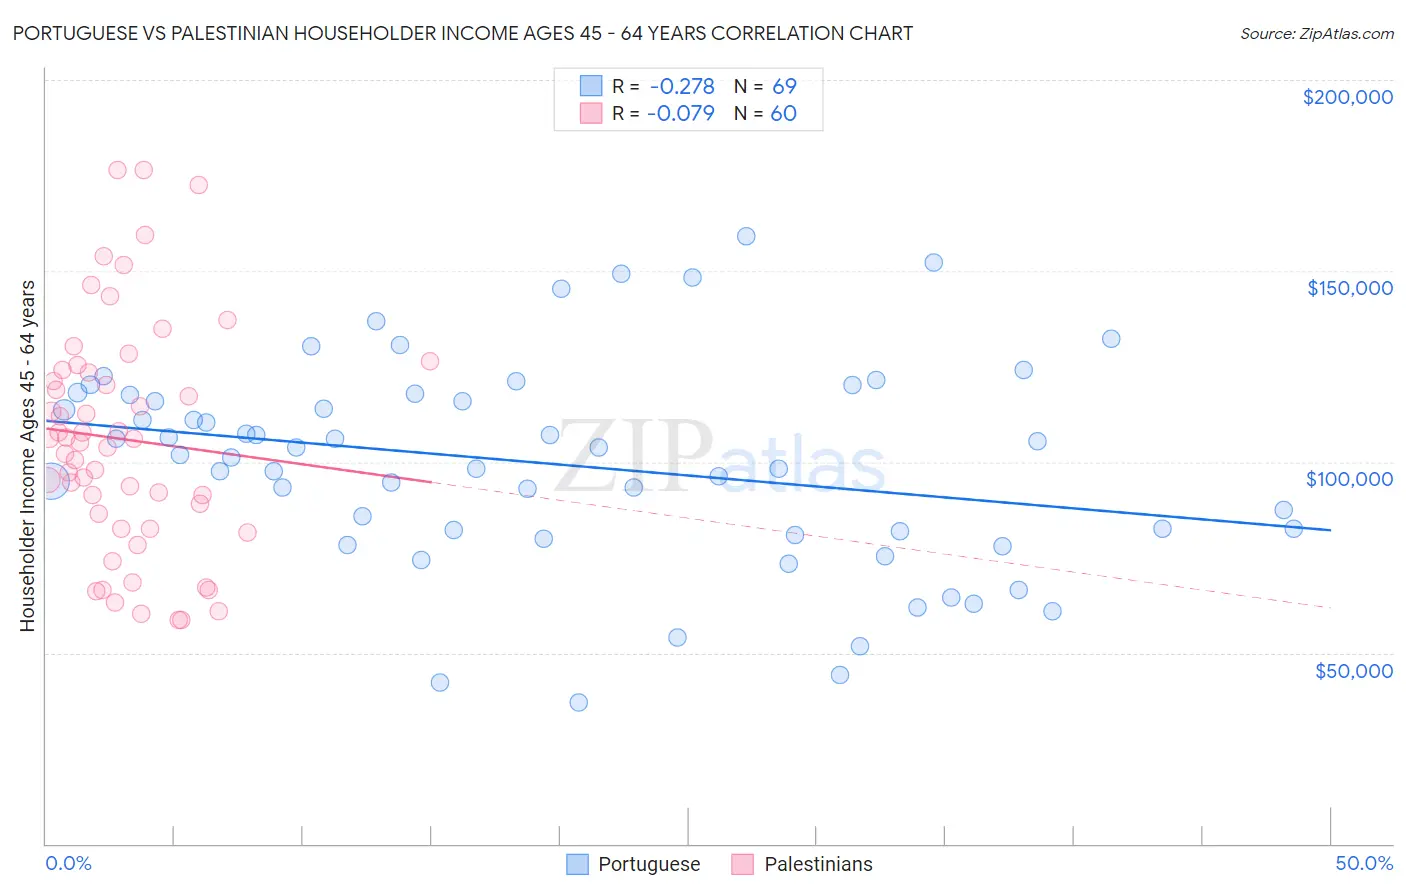 Portuguese vs Palestinian Householder Income Ages 45 - 64 years